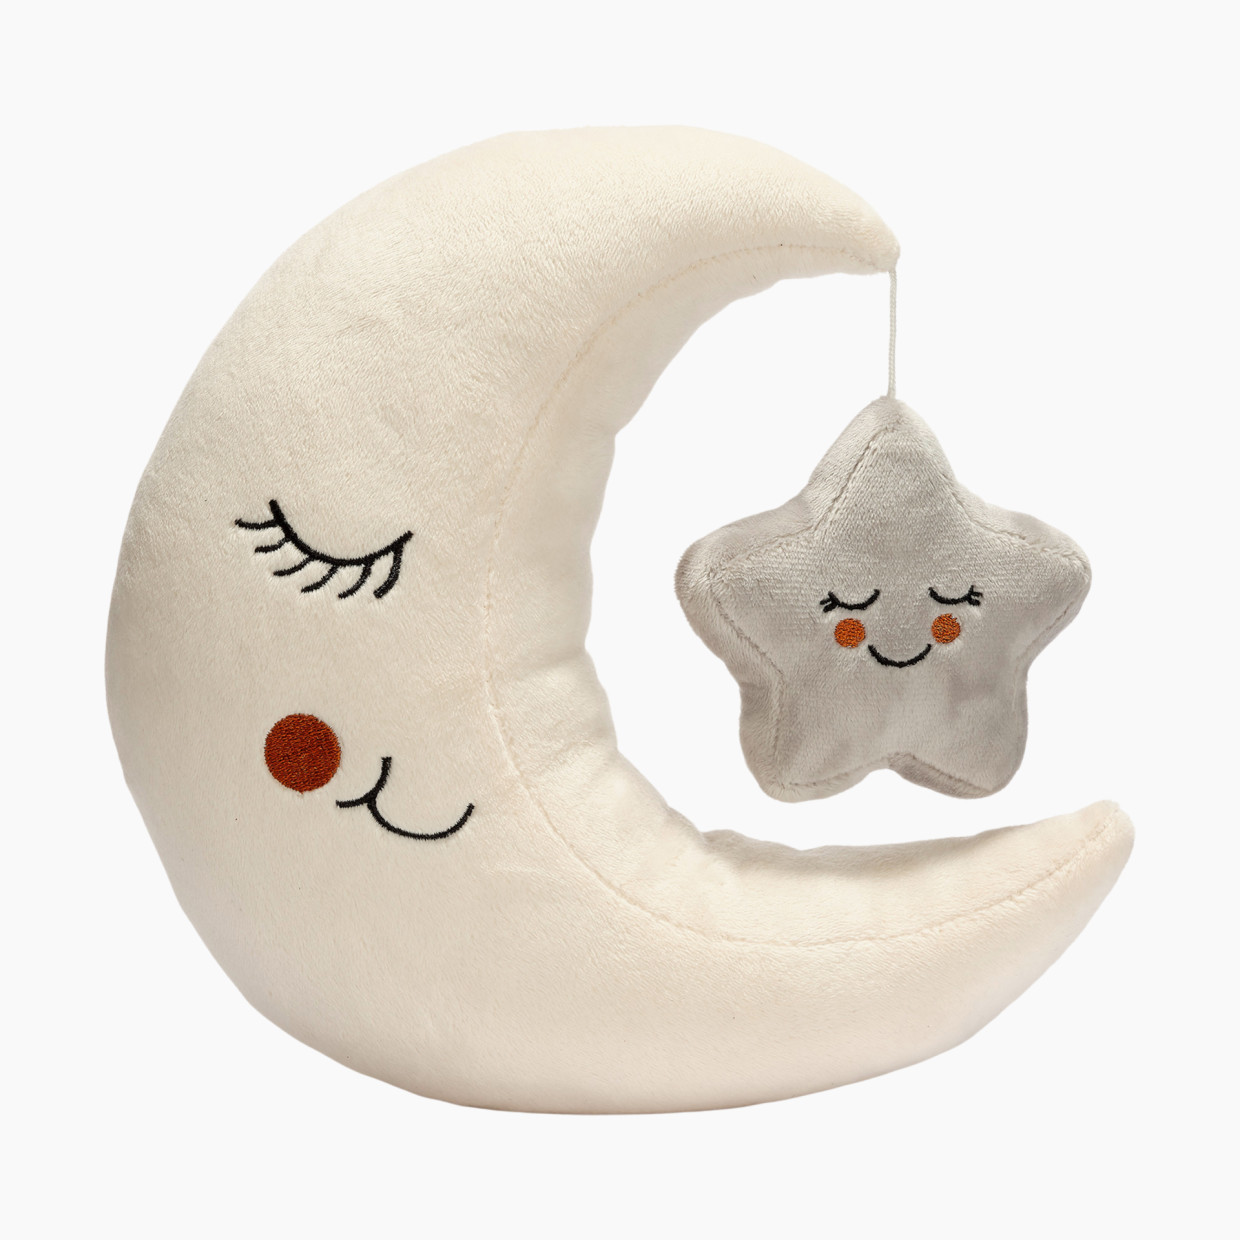 Goodnight Moon - Bunny in Bed Ornament Kit